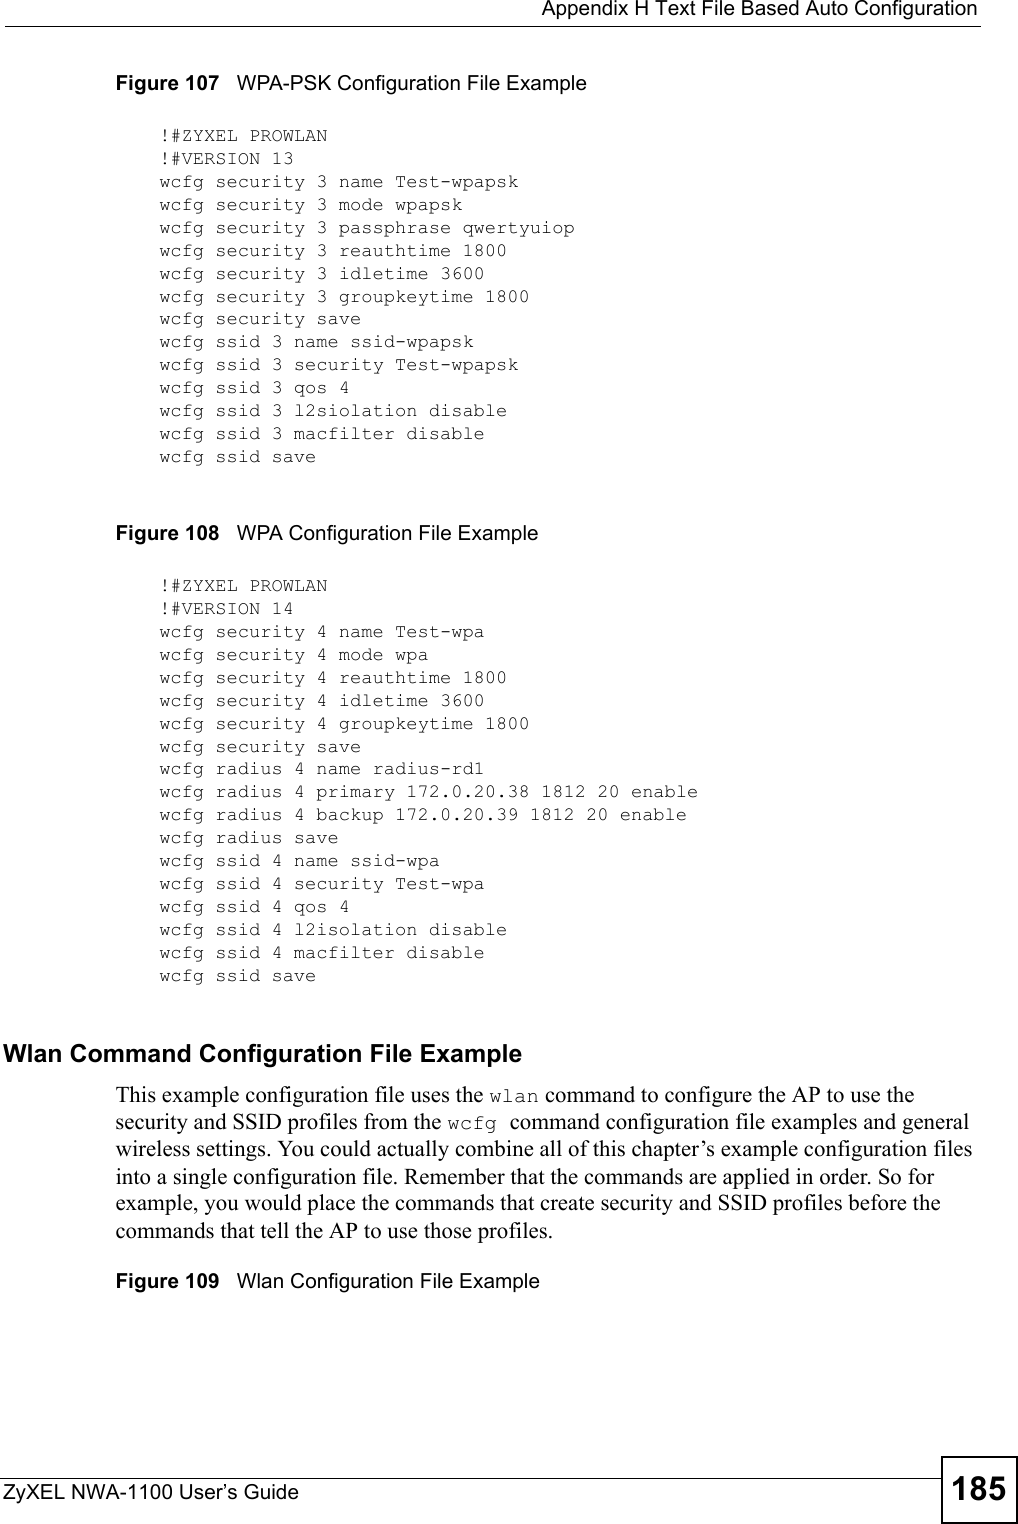  Appendix H Text File Based Auto ConfigurationZyXEL NWA-1100 User’s Guide 185Figure 107   WPA-PSK Configuration File ExampleFigure 108   WPA Configuration File ExampleWlan Command Configuration File ExampleThis example configuration file uses the wlan command to configure the AP to use the security and SSID profiles from the wcfg command configuration file examples and general wireless settings. You could actually combine all of this chapter’s example configuration files into a single configuration file. Remember that the commands are applied in order. So for example, you would place the commands that create security and SSID profiles before the commands that tell the AP to use those profiles.Figure 109   Wlan Configuration File Example!#ZYXEL PROWLAN!#VERSION 13wcfg security 3 name Test-wpapskwcfg security 3 mode wpapskwcfg security 3 passphrase qwertyuiopwcfg security 3 reauthtime 1800wcfg security 3 idletime 3600wcfg security 3 groupkeytime 1800wcfg security savewcfg ssid 3 name ssid-wpapskwcfg ssid 3 security Test-wpapskwcfg ssid 3 qos 4wcfg ssid 3 l2siolation disablewcfg ssid 3 macfilter disablewcfg ssid save!#ZYXEL PROWLAN!#VERSION 14wcfg security 4 name Test-wpawcfg security 4 mode wpawcfg security 4 reauthtime 1800wcfg security 4 idletime 3600wcfg security 4 groupkeytime 1800wcfg security savewcfg radius 4 name radius-rd1wcfg radius 4 primary 172.0.20.38 1812 20 enablewcfg radius 4 backup 172.0.20.39 1812 20 enablewcfg radius savewcfg ssid 4 name ssid-wpawcfg ssid 4 security Test-wpawcfg ssid 4 qos 4wcfg ssid 4 l2isolation disablewcfg ssid 4 macfilter disablewcfg ssid save